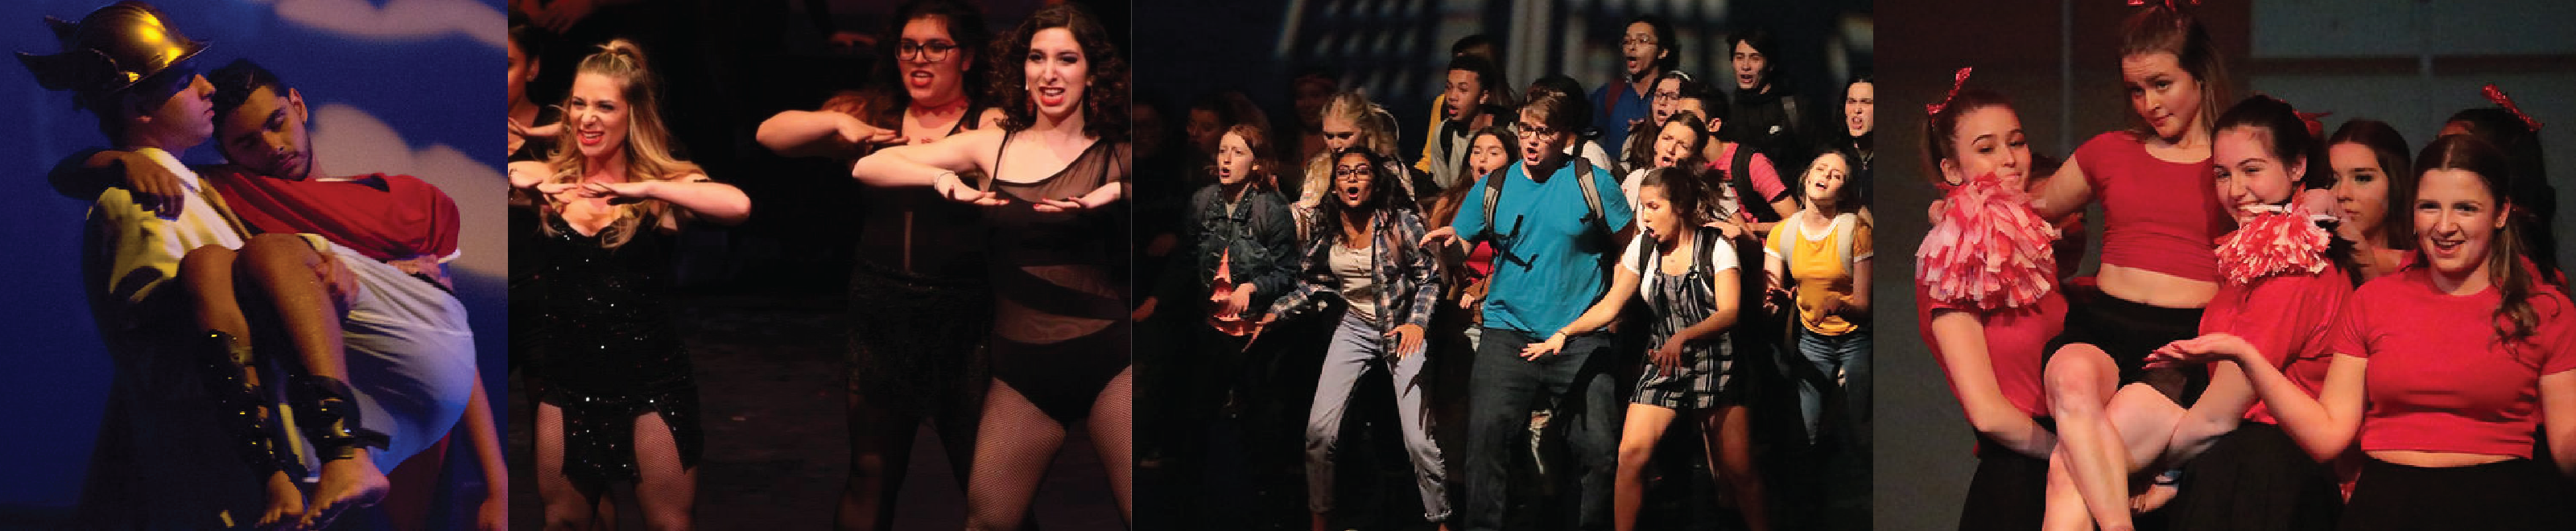 Four pictures illustrating students performing in a show.